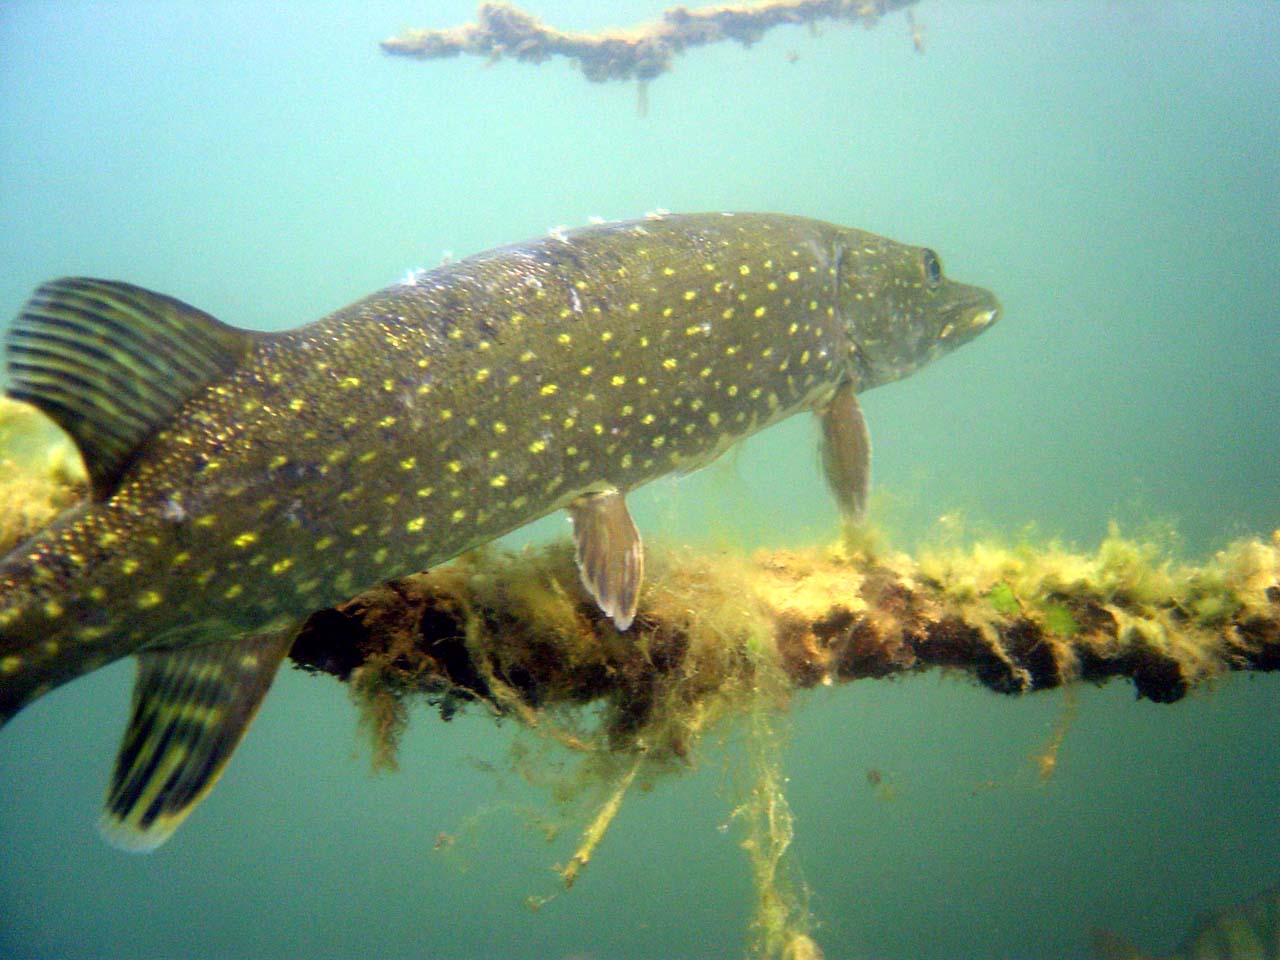 Northern Pike (Esox lucius) - Wiki; Image ONLY